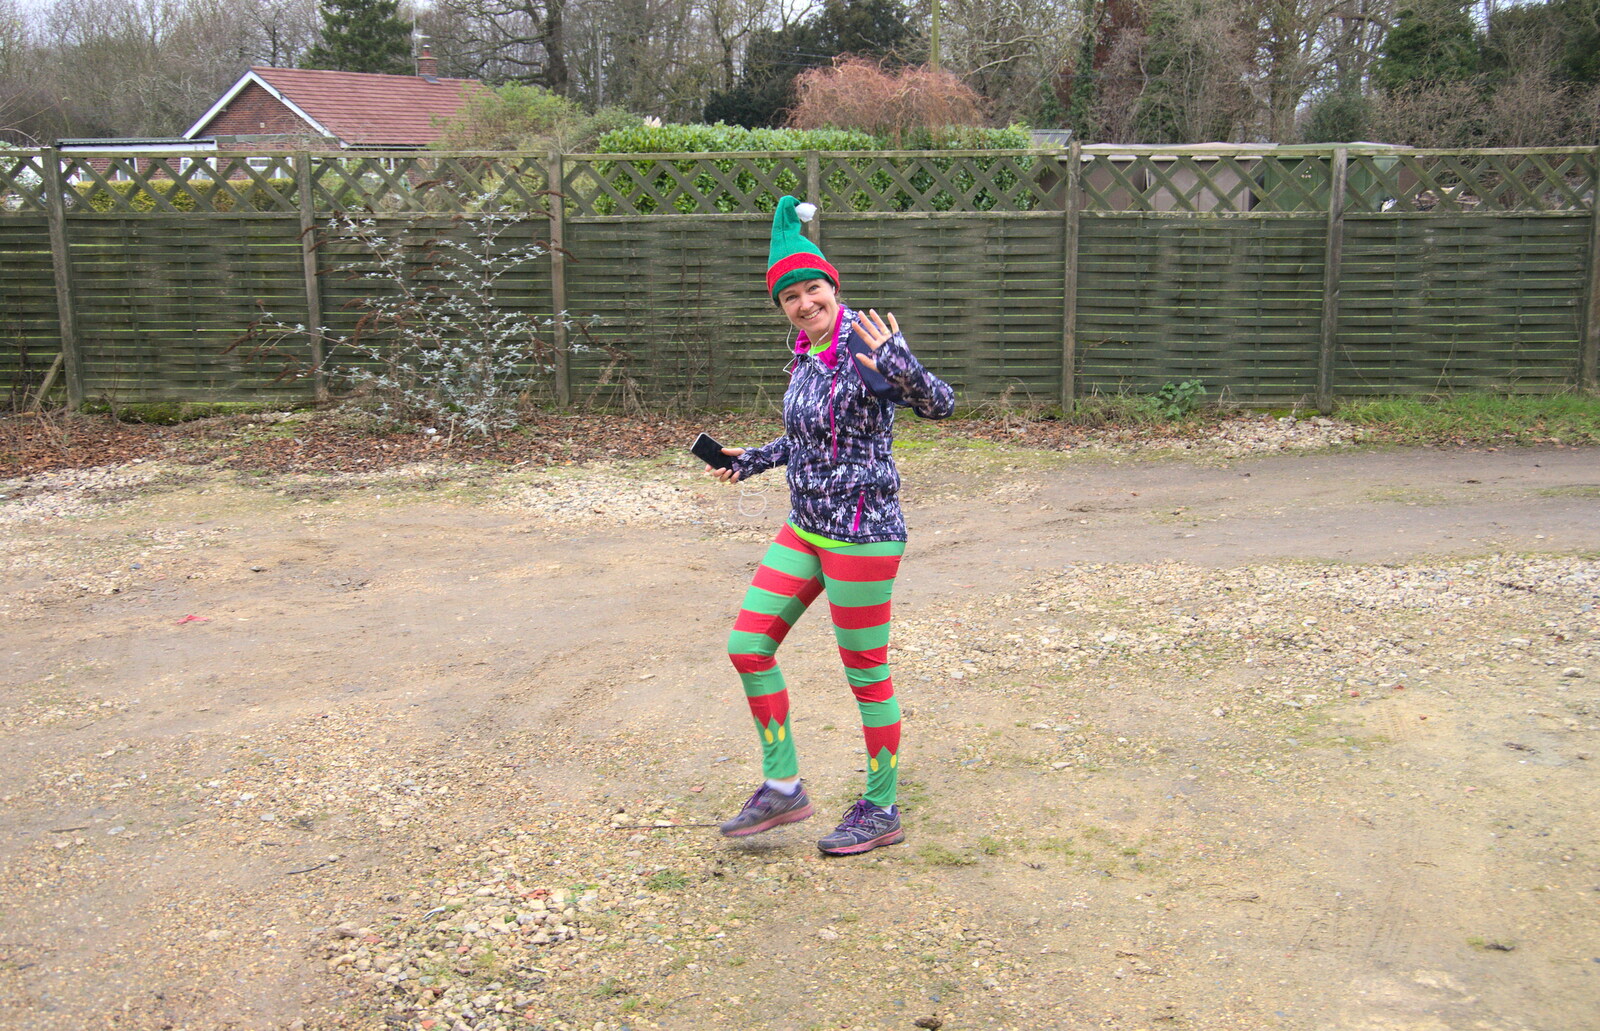 Isobel goes for a Christmas run in elf leggings from Christmas Day and The Swan Inn, Brome, Suffolk - 25th December 2017